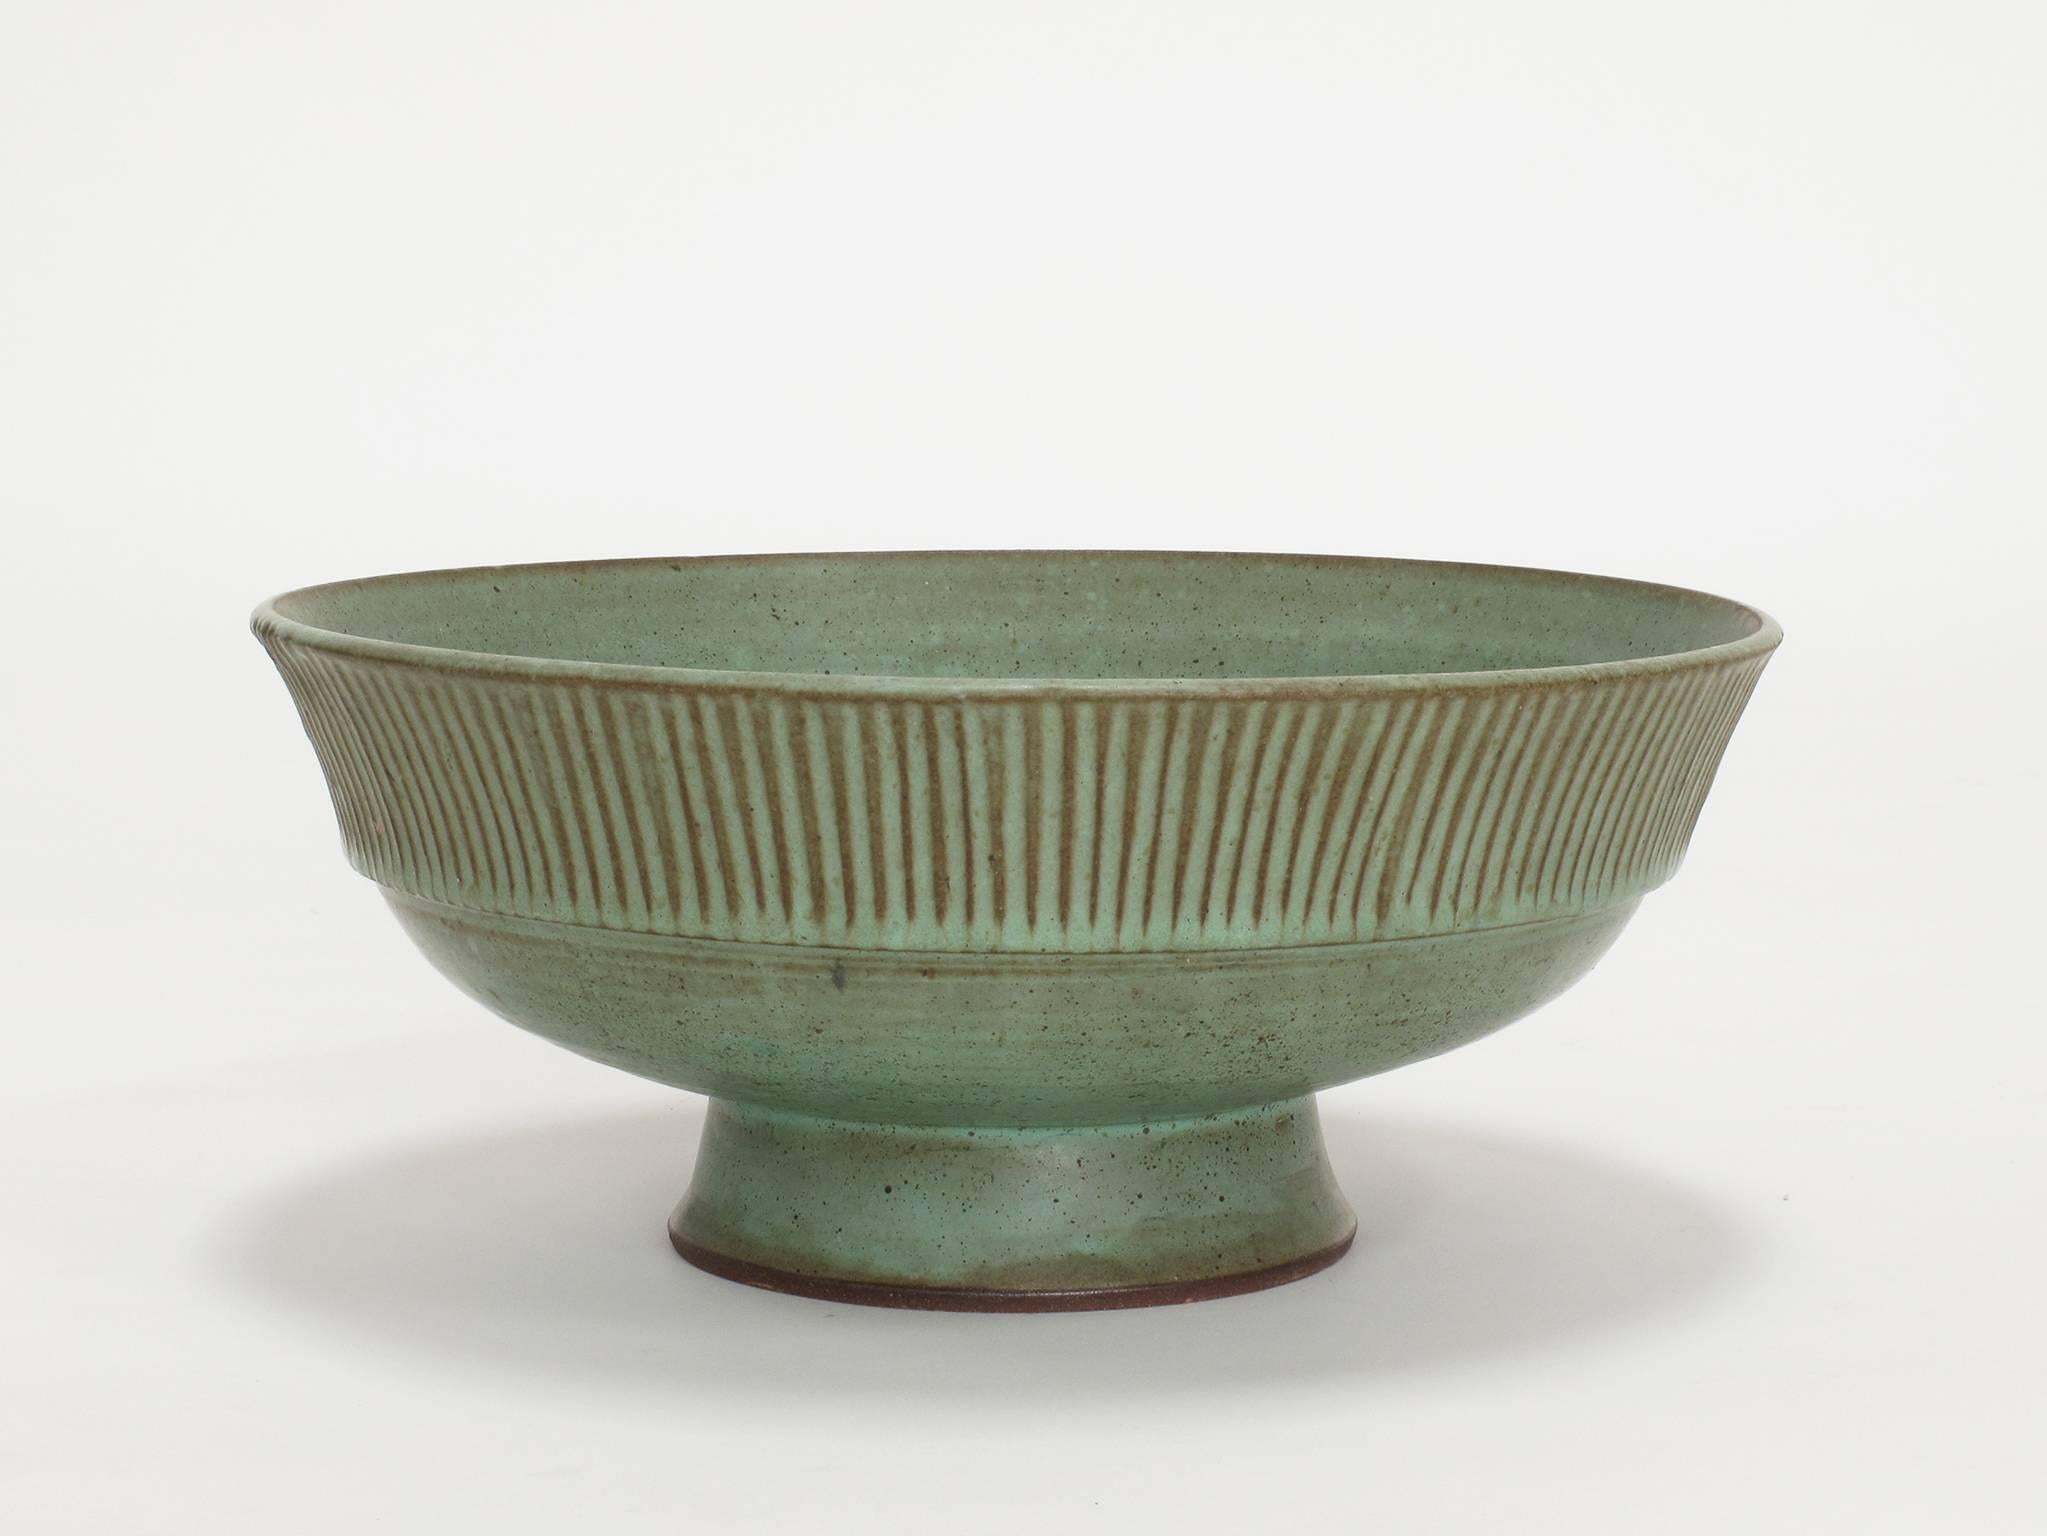 Laura Andreson
'Footed Bowl', 1953
Stoneware, glazed, linear sgraffito design
Unique, handmade, signed by the artist
Los Angeles, California
Provenance: The estate of David Cressey
Measurements in inches: 4.75 high x 11.25 diameter
Please